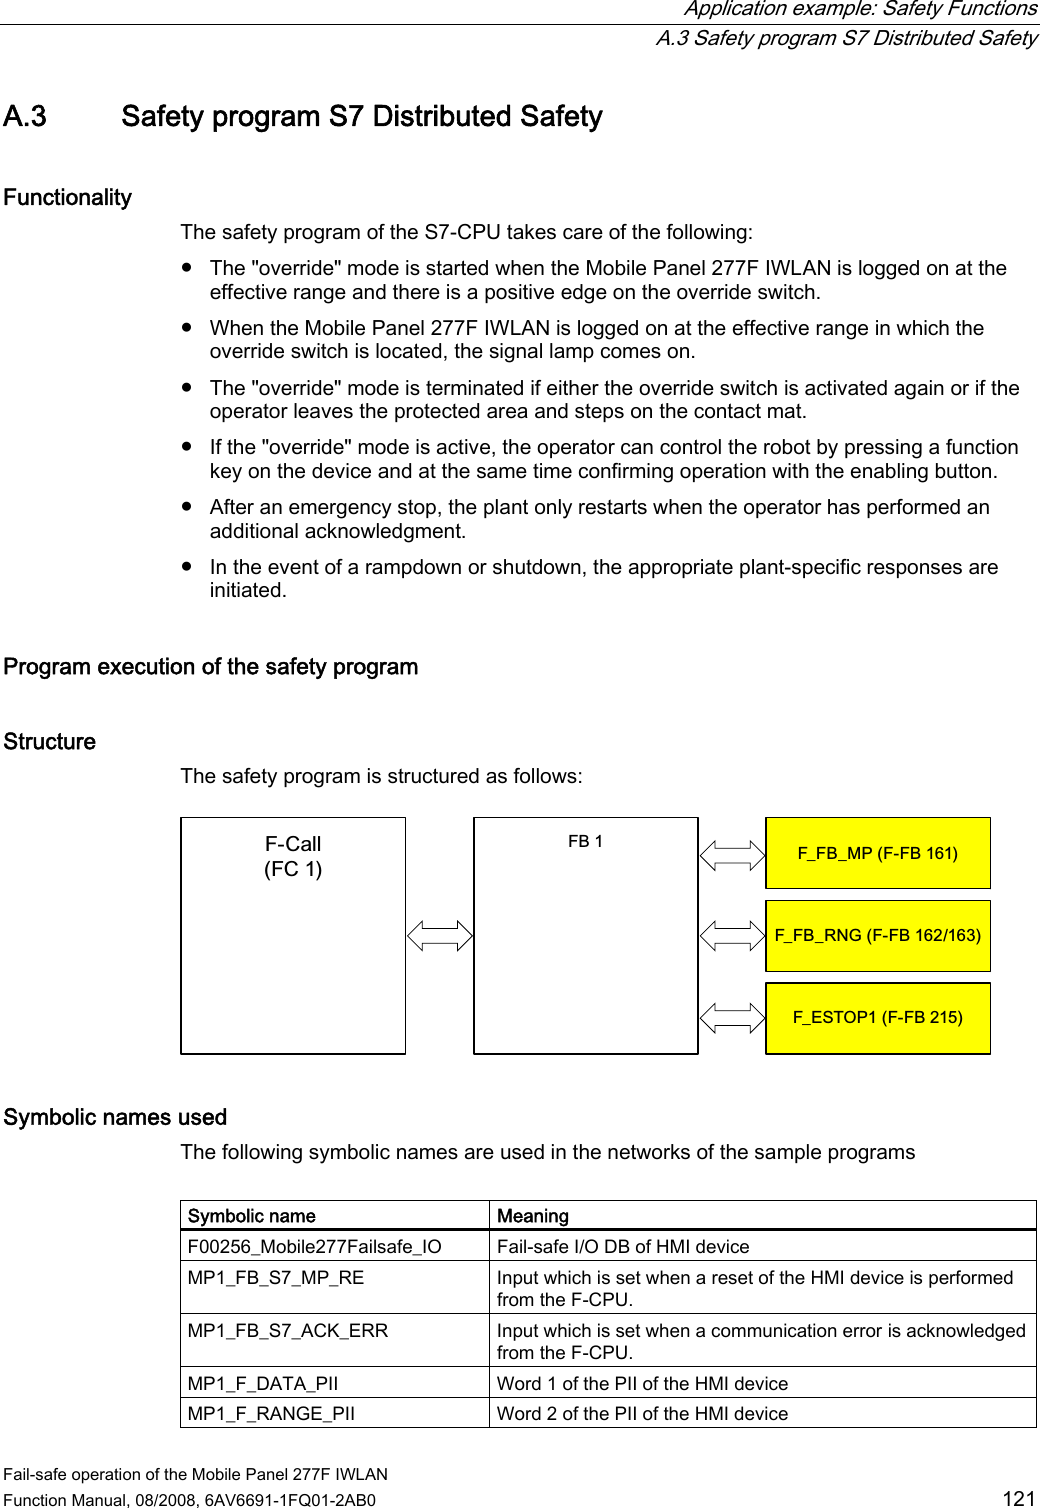  Application example: Safety Functions   A.3 Safety program S7 Distributed Safety Fail-safe operation of the Mobile Panel 277F IWLAN  Function Manual, 08/2008, 6AV6691-1FQ01-2AB0  121 A.3 Safety program S7 Distributed Safety Functionality The safety program of the S7-CPU takes care of the following:  ●  The &quot;override&quot; mode is started when the Mobile Panel 277F IWLAN is logged on at the effective range and there is a positive edge on the override switch. ●  When the Mobile Panel 277F IWLAN is logged on at the effective range in which the override switch is located, the signal lamp comes on. ●  The &quot;override&quot; mode is terminated if either the override switch is activated again or if the operator leaves the protected area and steps on the contact mat. ●  If the &quot;override&quot; mode is active, the operator can control the robot by pressing a function key on the device and at the same time confirming operation with the enabling button. ●  After an emergency stop, the plant only restarts when the operator has performed an additional acknowledgment. ●  In the event of a rampdown or shutdown, the appropriate plant-specific responses are initiated. Program execution of the safety program Structure The safety program is structured as follows: )% )B)%B03))%)B)%B51*))%)B(6723))%)&amp;DOO)&amp; Symbolic names used The following symbolic names are used in the networks of the sample programs  Symbolic name  Meaning F00256_Mobile277Failsafe_IO  Fail-safe I/O DB of HMI device MP1_FB_S7_MP_RE  Input which is set when a reset of the HMI device is performed from the F-CPU. MP1_FB_S7_ACK_ERR  Input which is set when a communication error is acknowledged from the F-CPU. MP1_F_DATA_PII  Word 1 of the PII of the HMI device MP1_F_RANGE_PII  Word 2 of the PII of the HMI device 